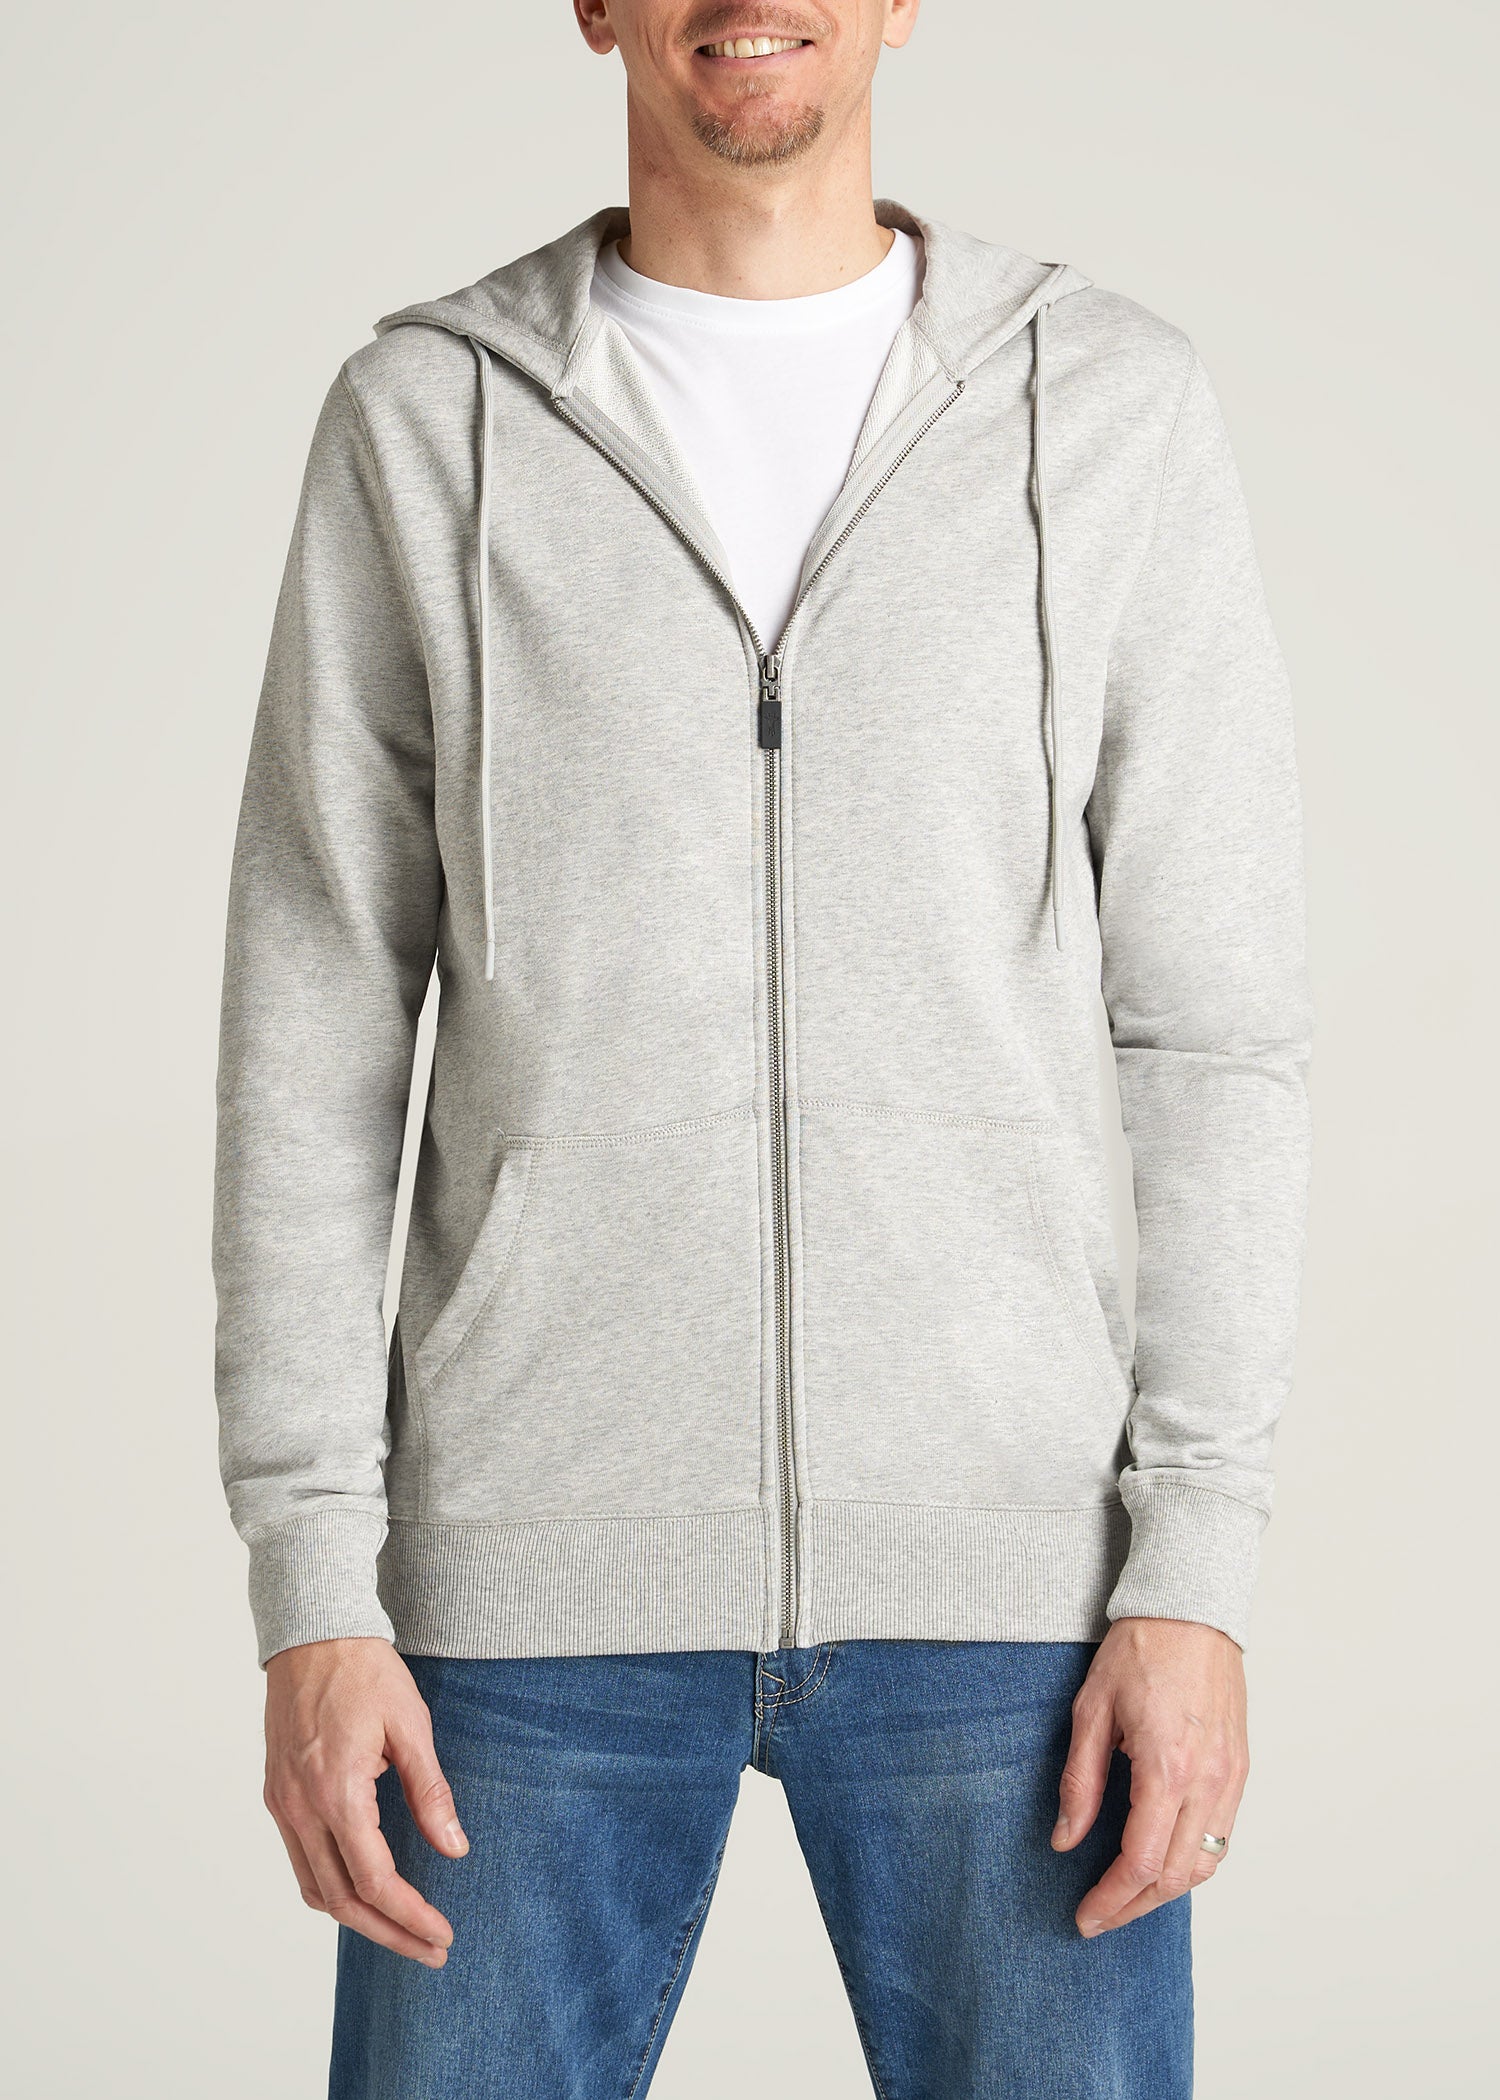    American-Tall-Men-8020-FrenchTerry-FullZip-Hoodie-GreyMix-front